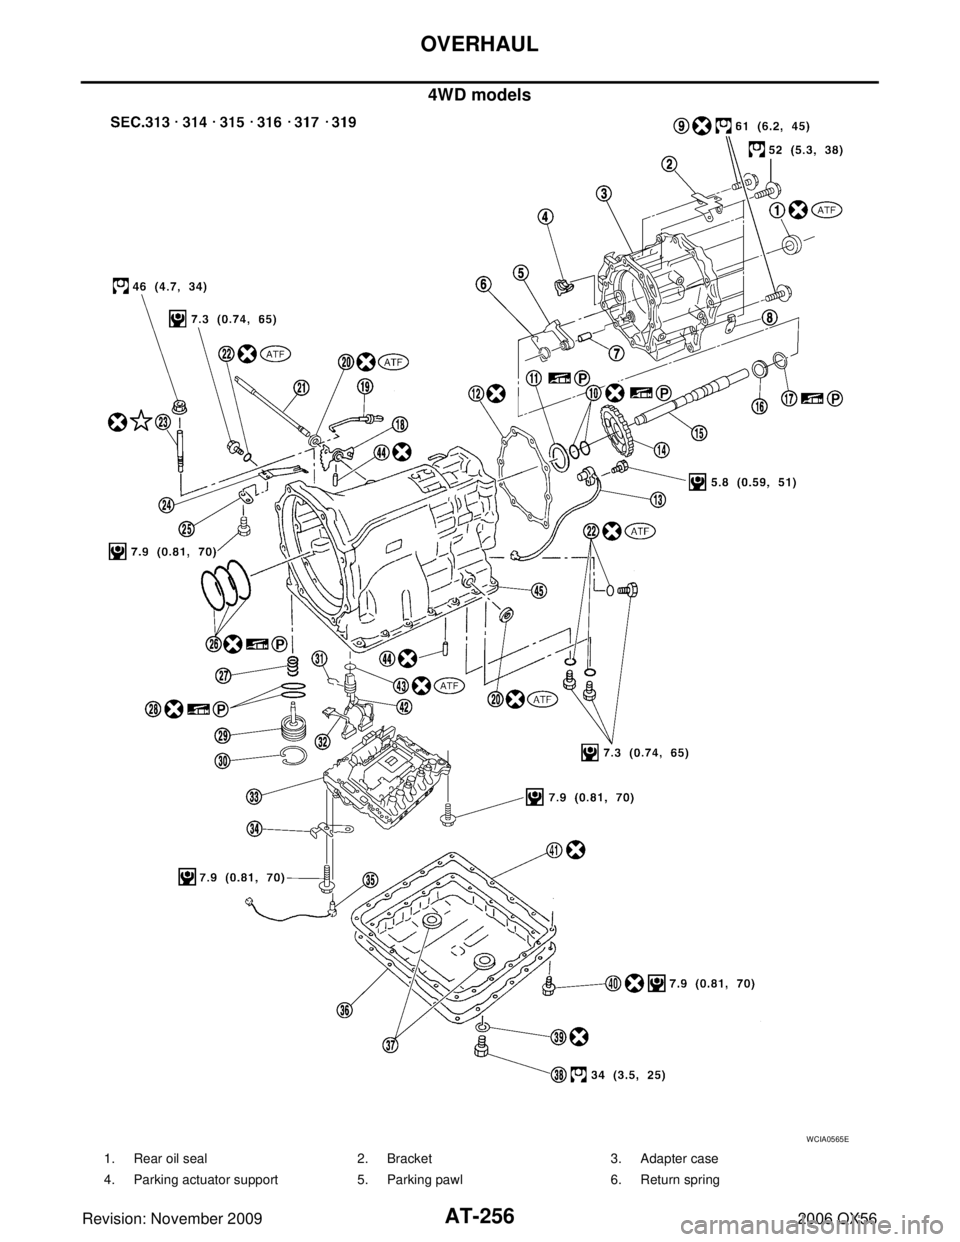 INFINITI QX56 2006  Factory Service Manual AT-256
OVERHAUL
Revision: November 20092006 QX56
4WD models
WCIA0565E
1. Rear oil seal2. Bracket 3. Adapter case
4. Parking actuator support 5. Parking pawl 6. Return spring 